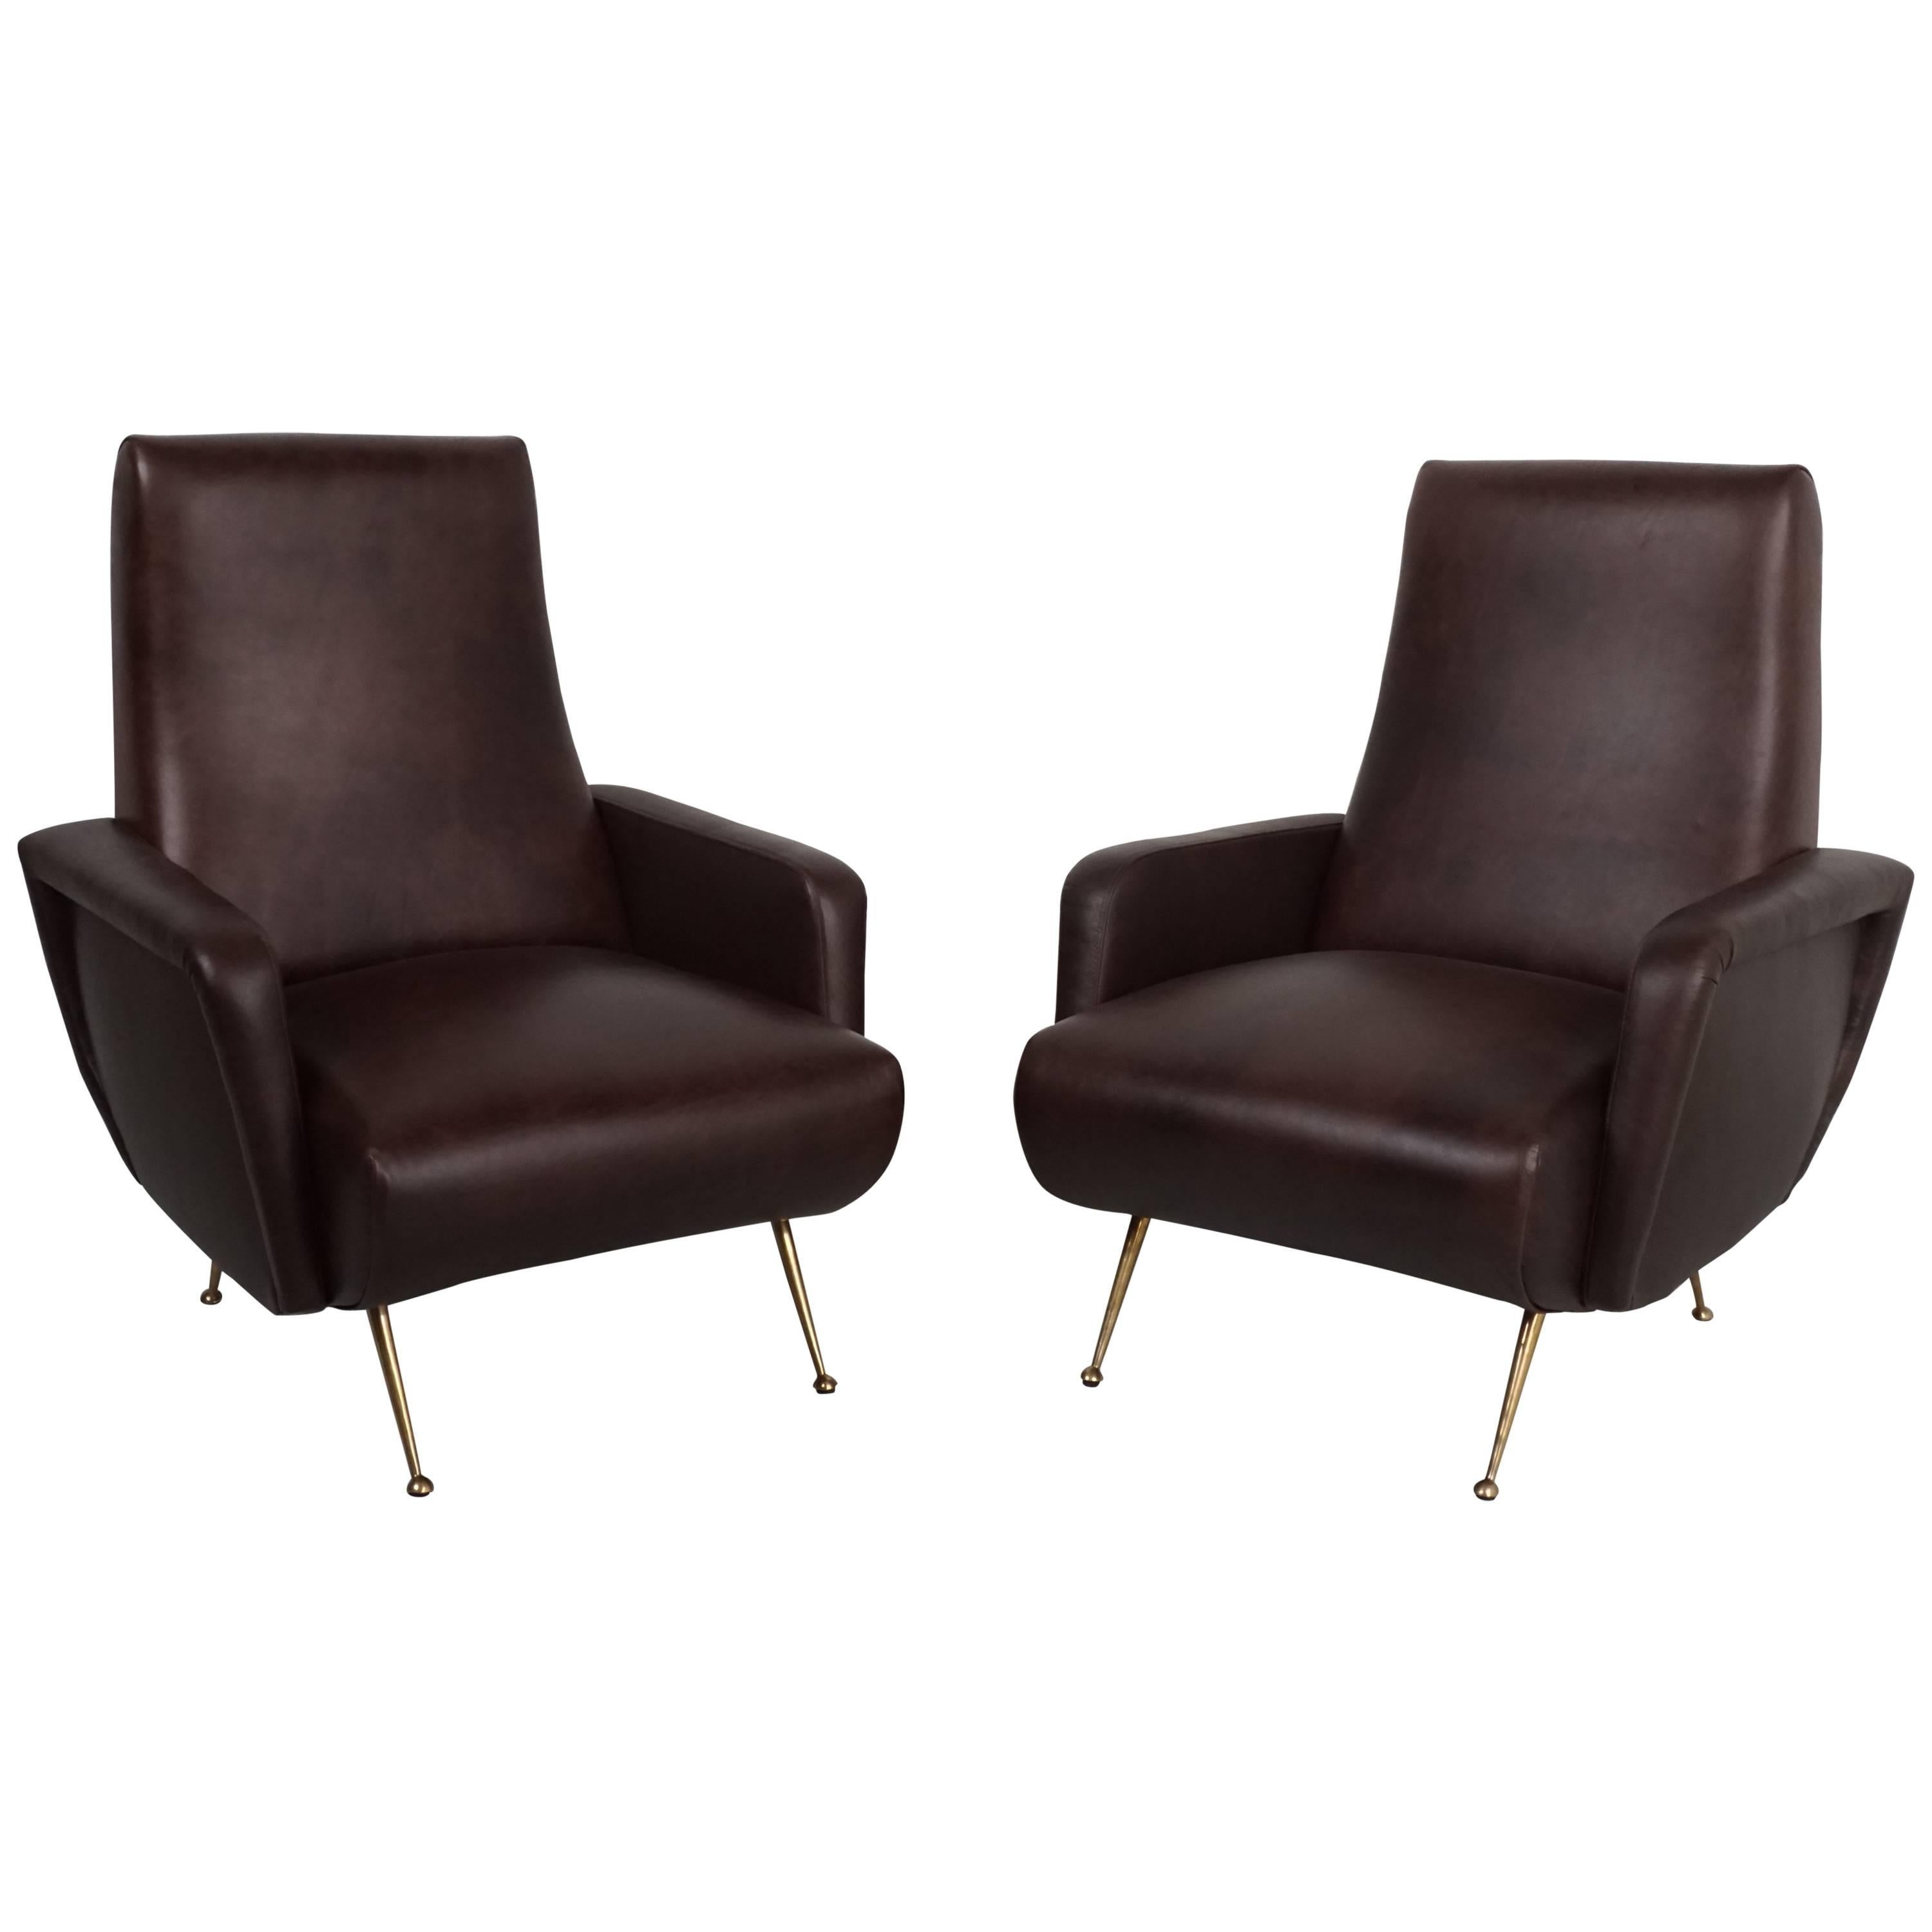 Italian Sculptural Leather Chairs